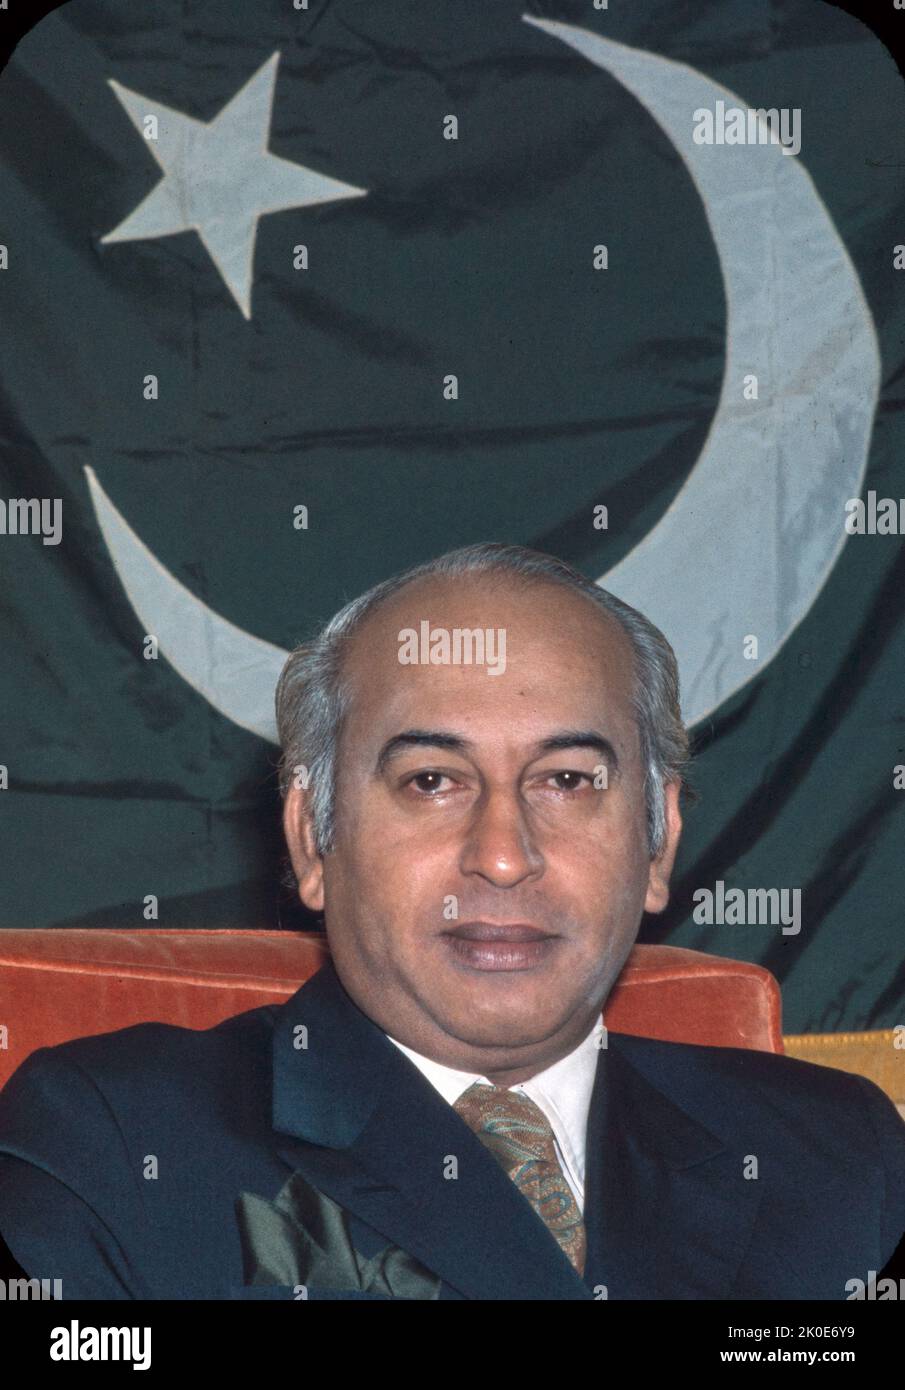 Shaheed Zulfiqar Ali Bhutto (1928 - 1979), Pakistani barrister and politician who served as prime minister of Pakistan from 1973 to 1977, and prior to that as the fourth president of Pakistan from 1971 to 1973. He was also the founder of the Pakistan People's Party (PPP) and served as its chairman until his execution in 1979. Stock Photo